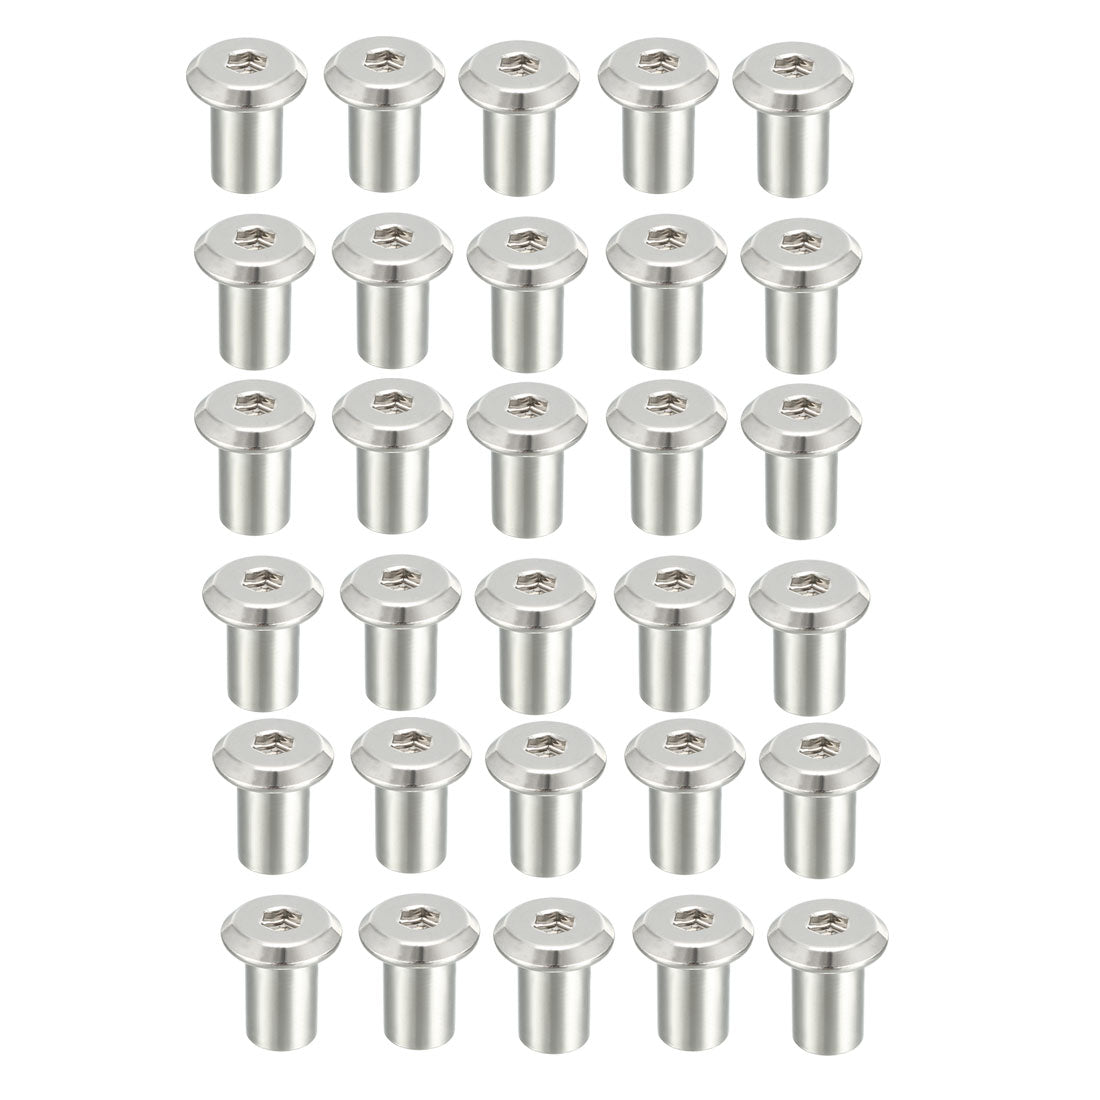 uxcell Uxcell M6x12mm Hex Socket Head Insert Nut Screw Post Sleeve Nut for Furniture 30pcs